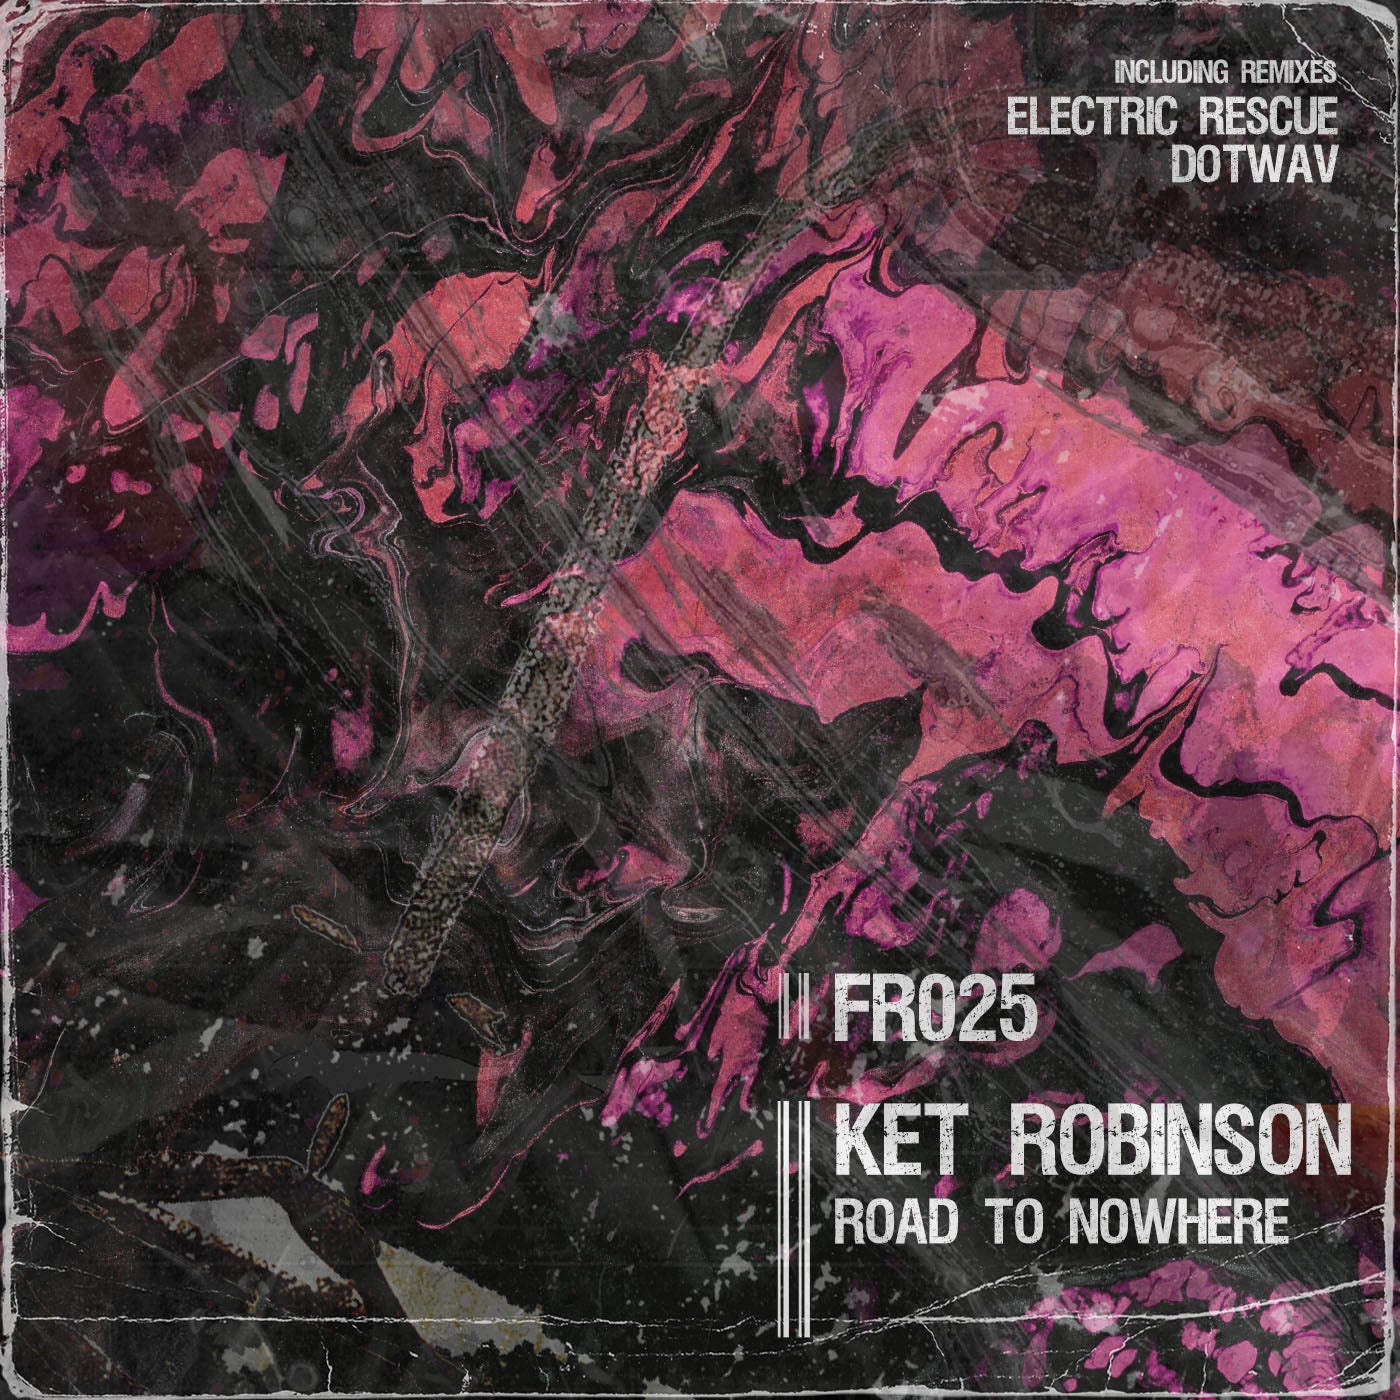 Ket Robinson – Road To Nowhere [FR025]